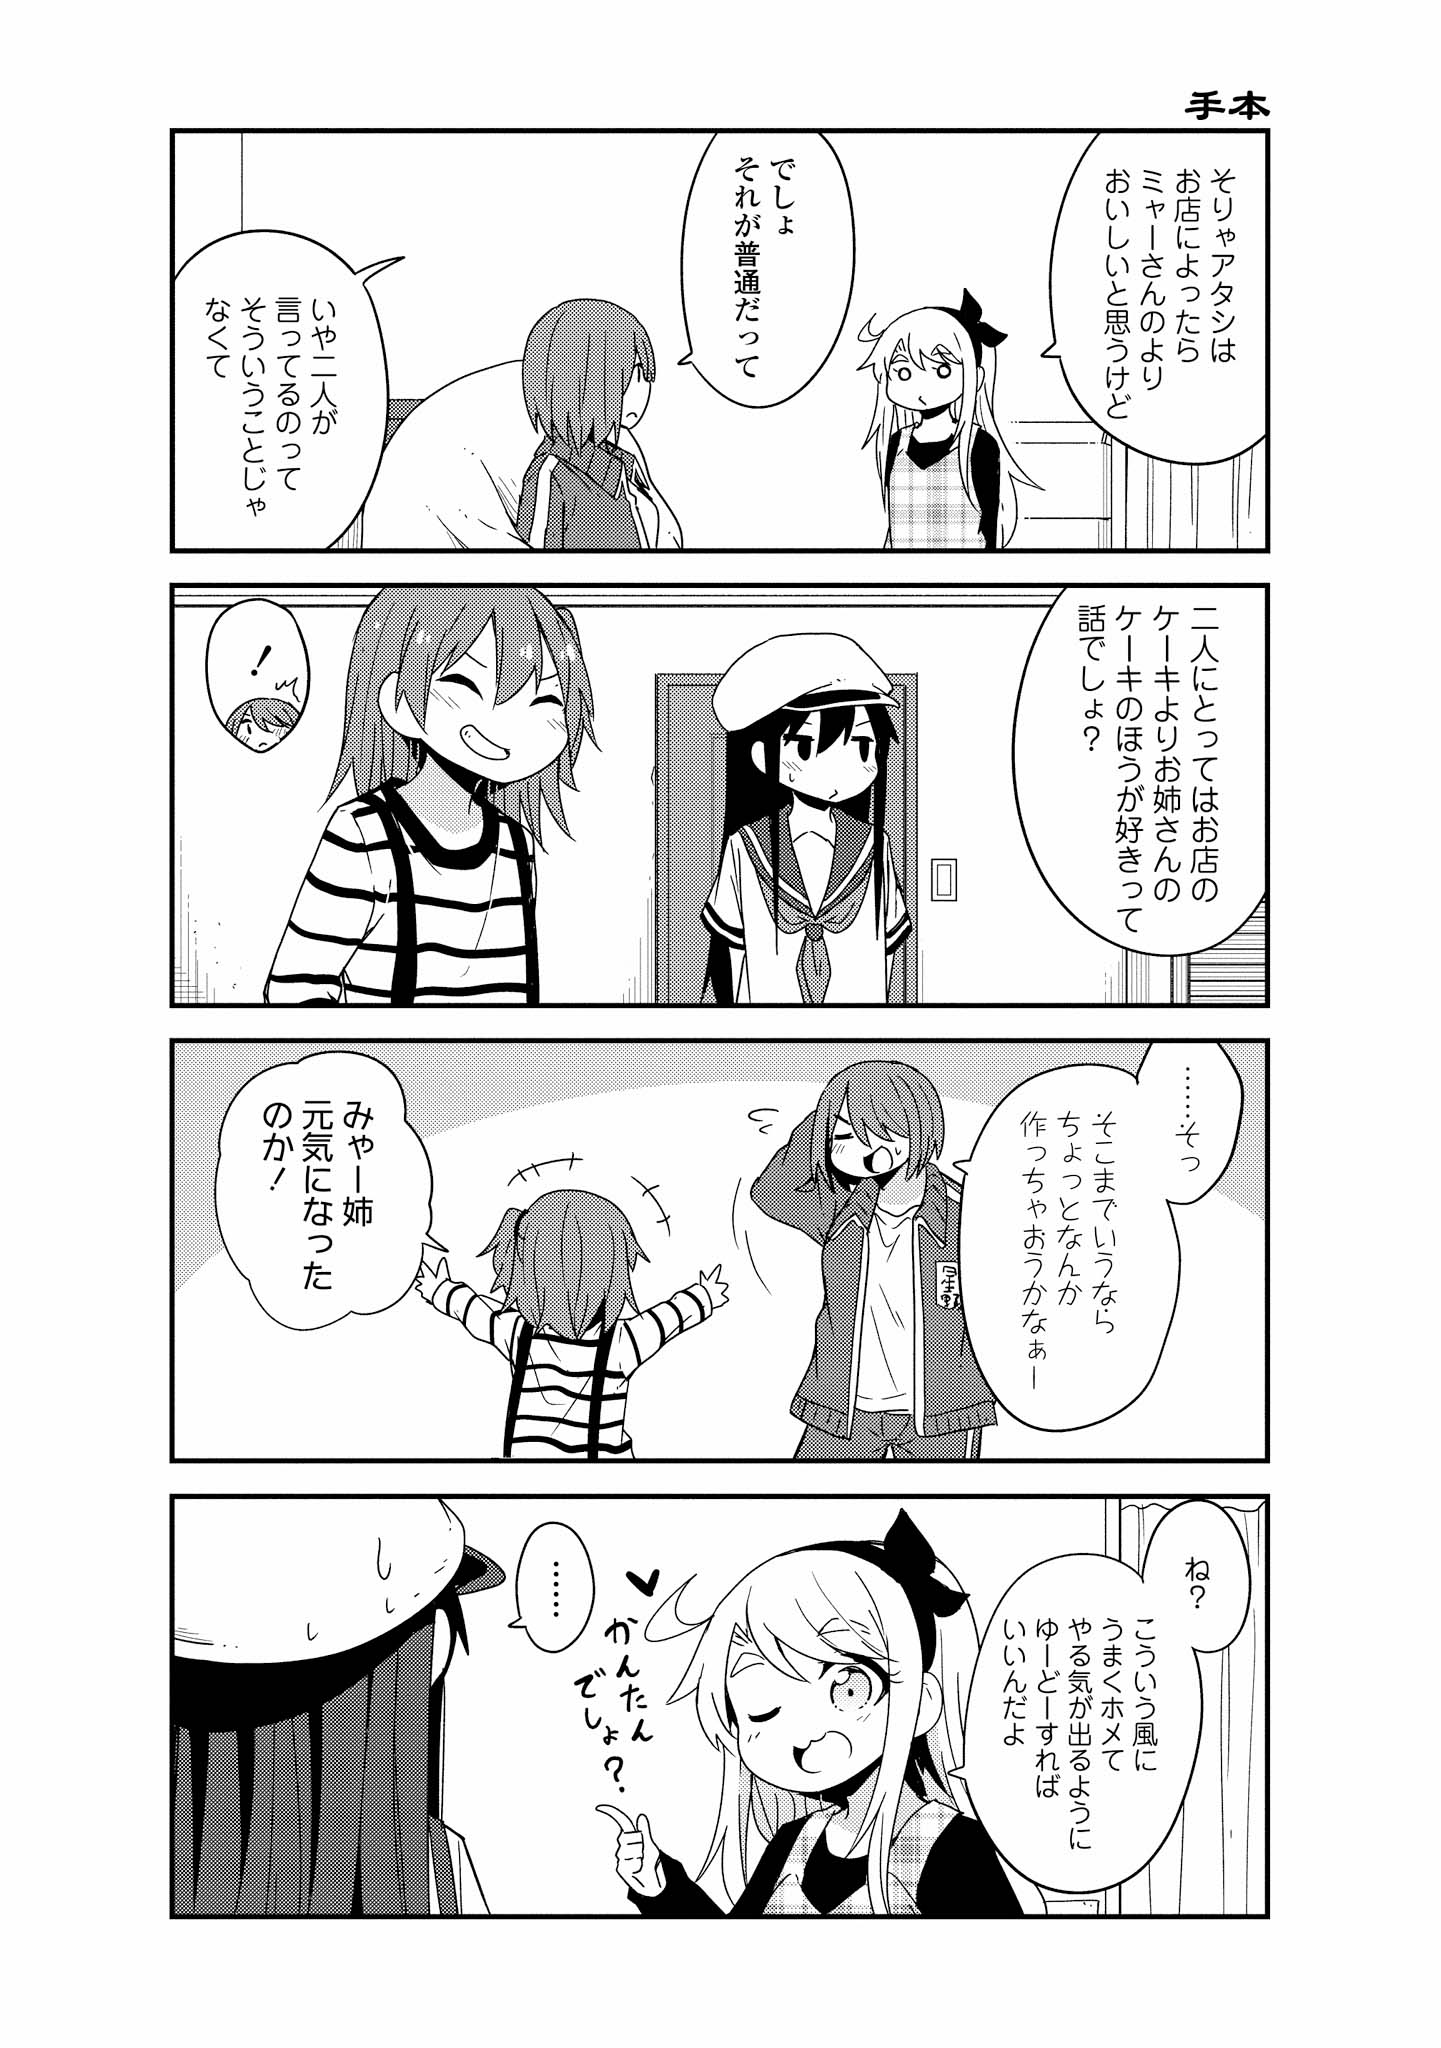 Wataten! An Angel Flew Down to Me 私に天使が舞い降りた！ 第37話 - Page 16